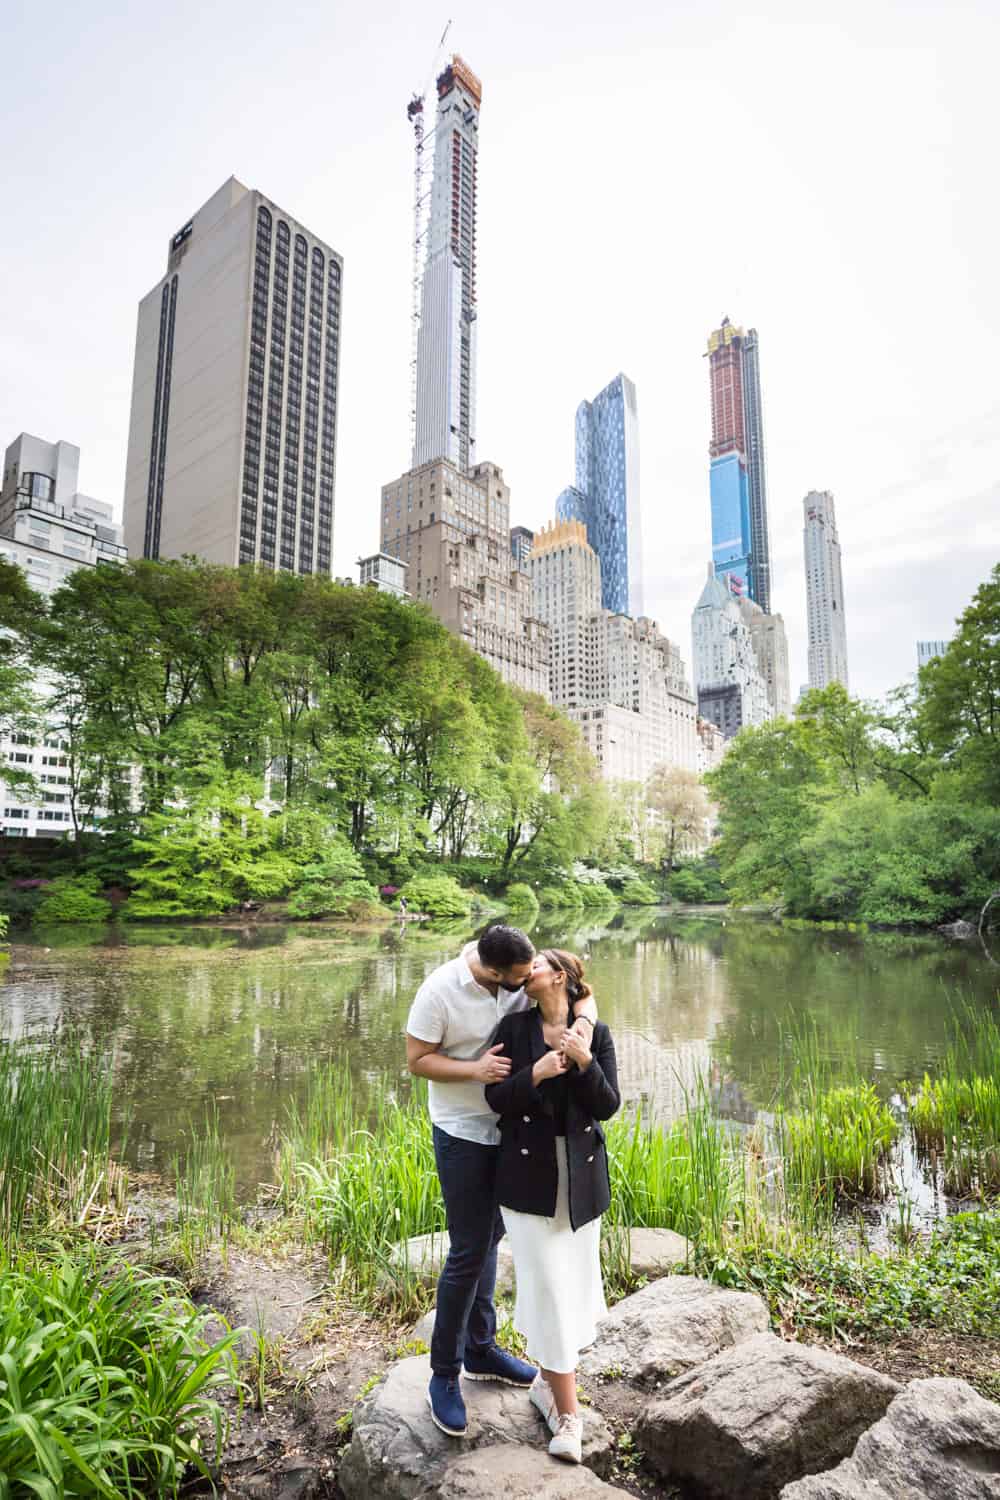 Couple kissing in front of Central Park pond